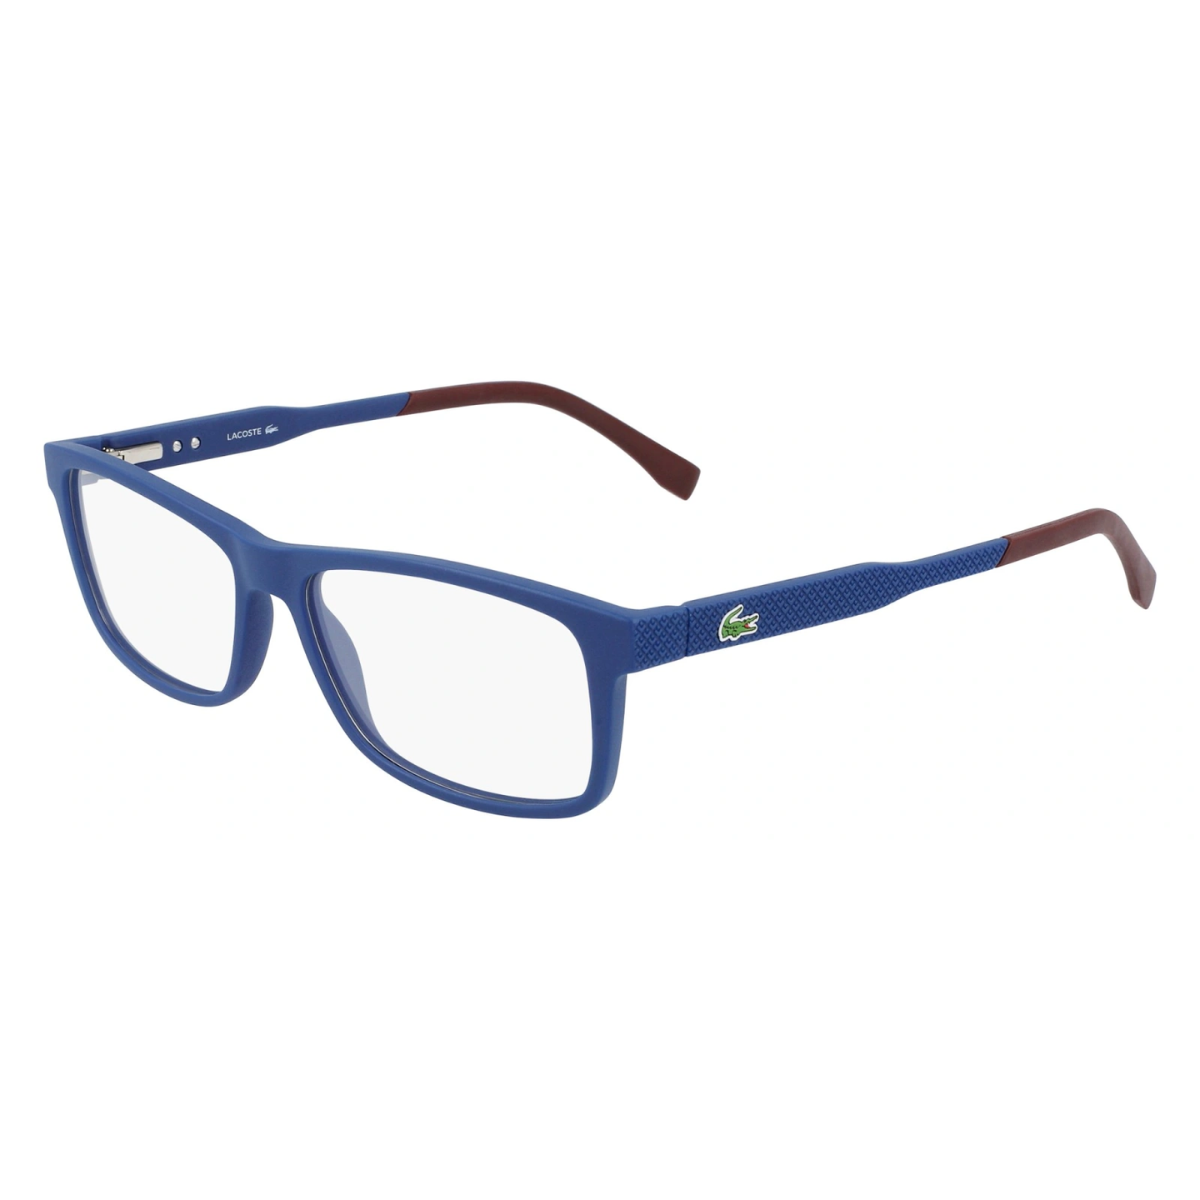 Lacoste 2876 Frame